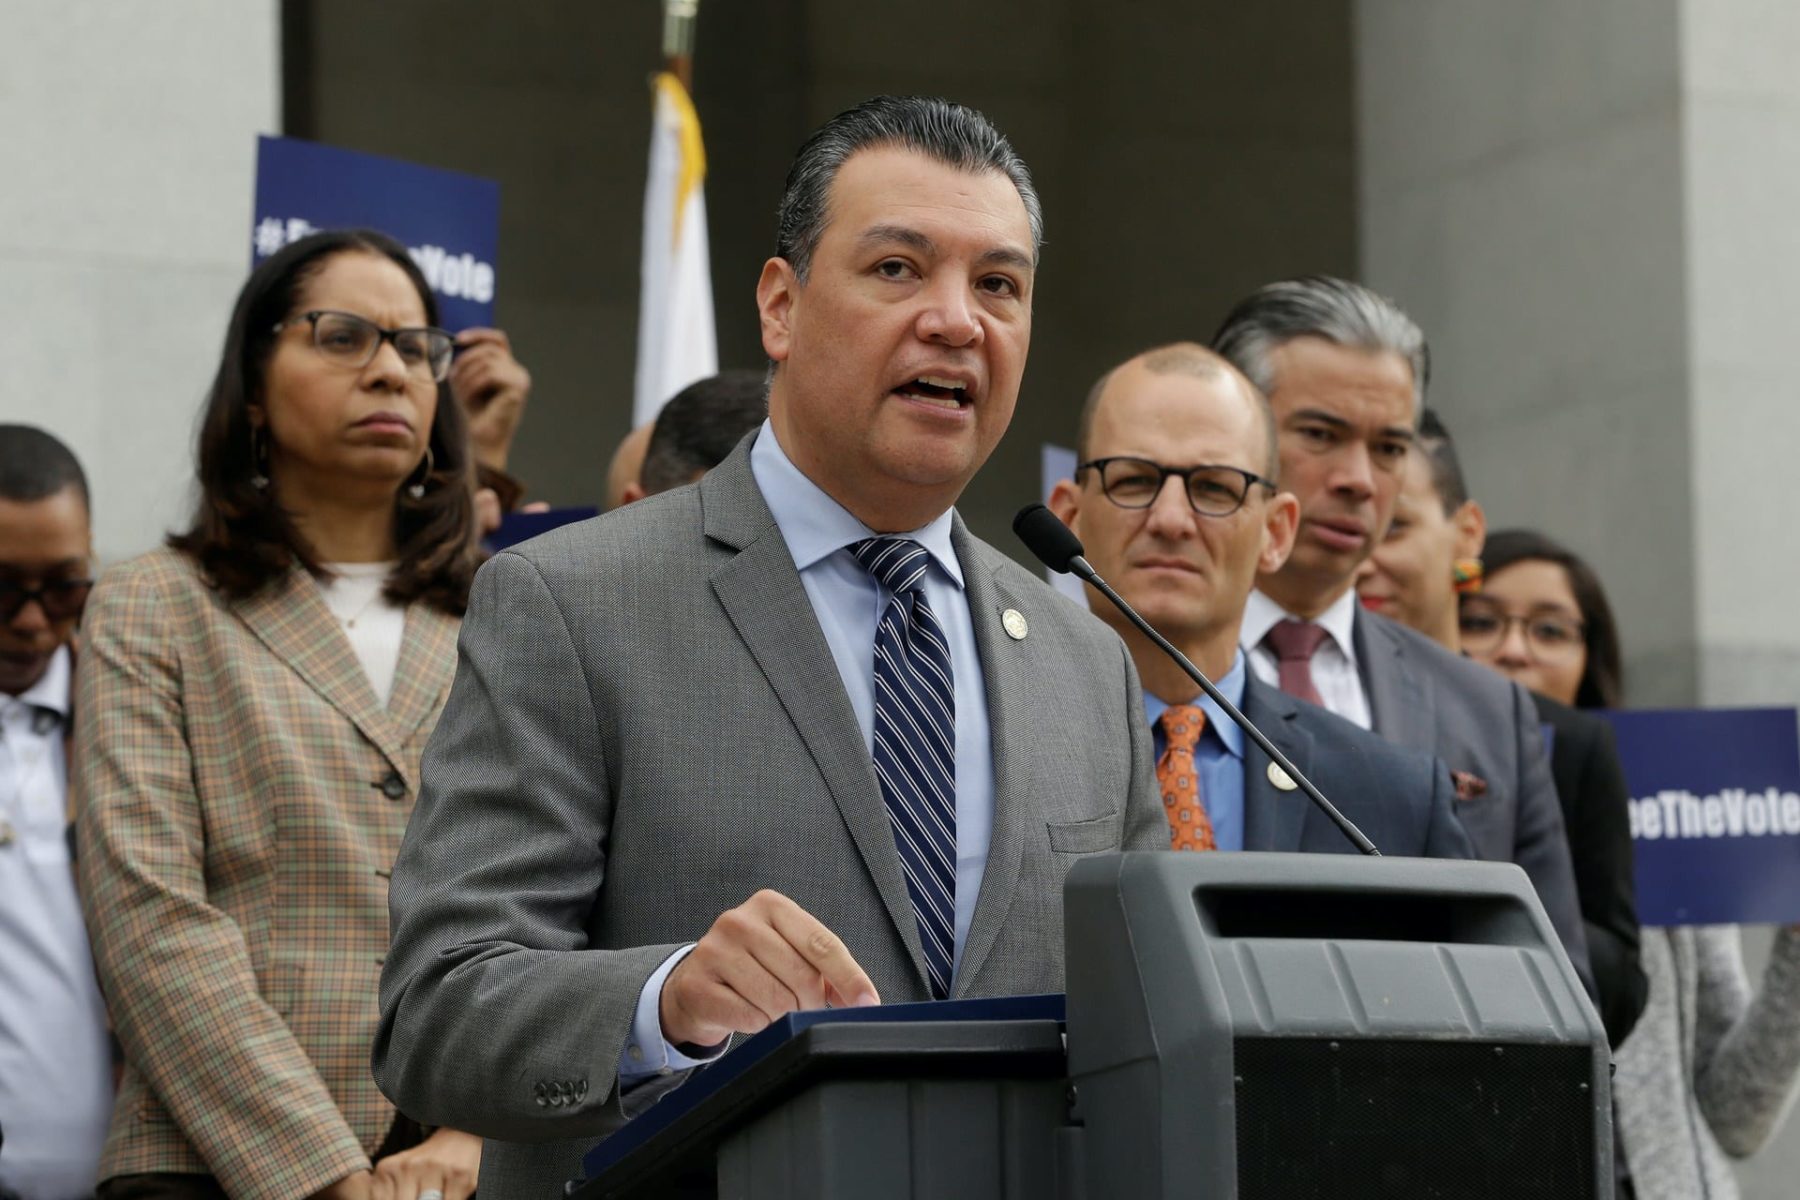 Alex Padilla stands at a podium and speaks into a microphone.